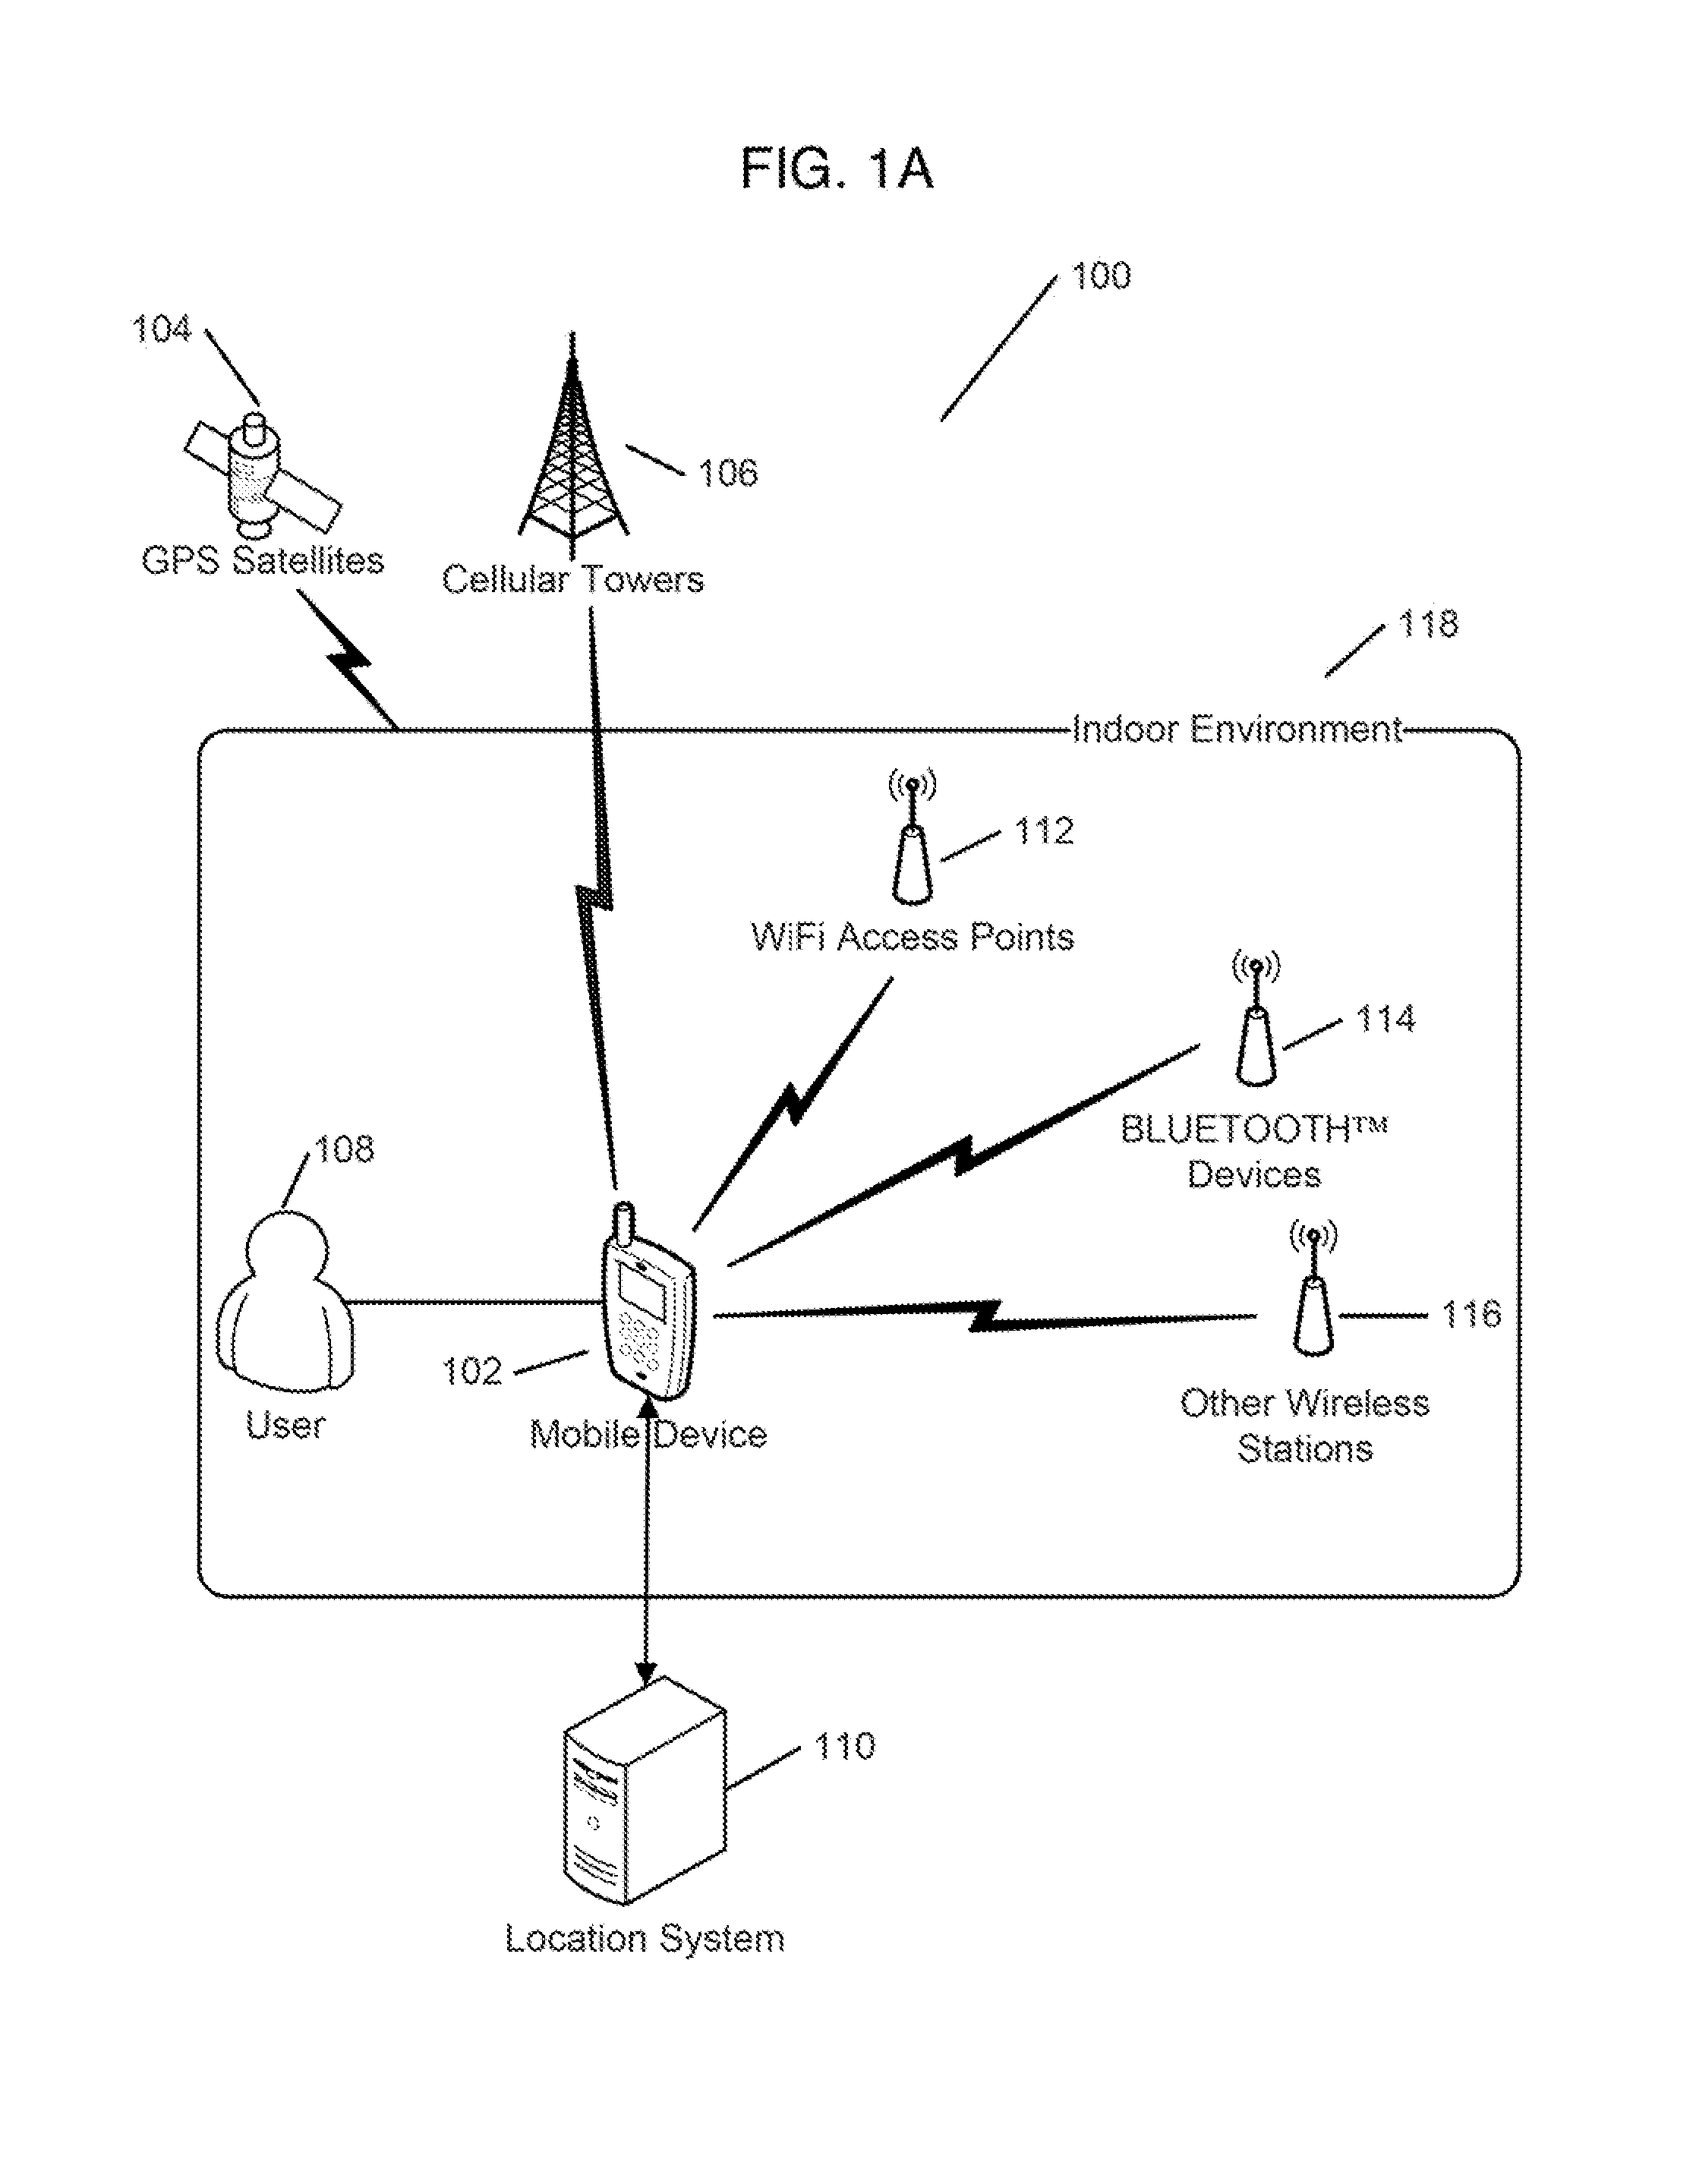 Systems and methods for indoor geolocation based on yield of RF signals